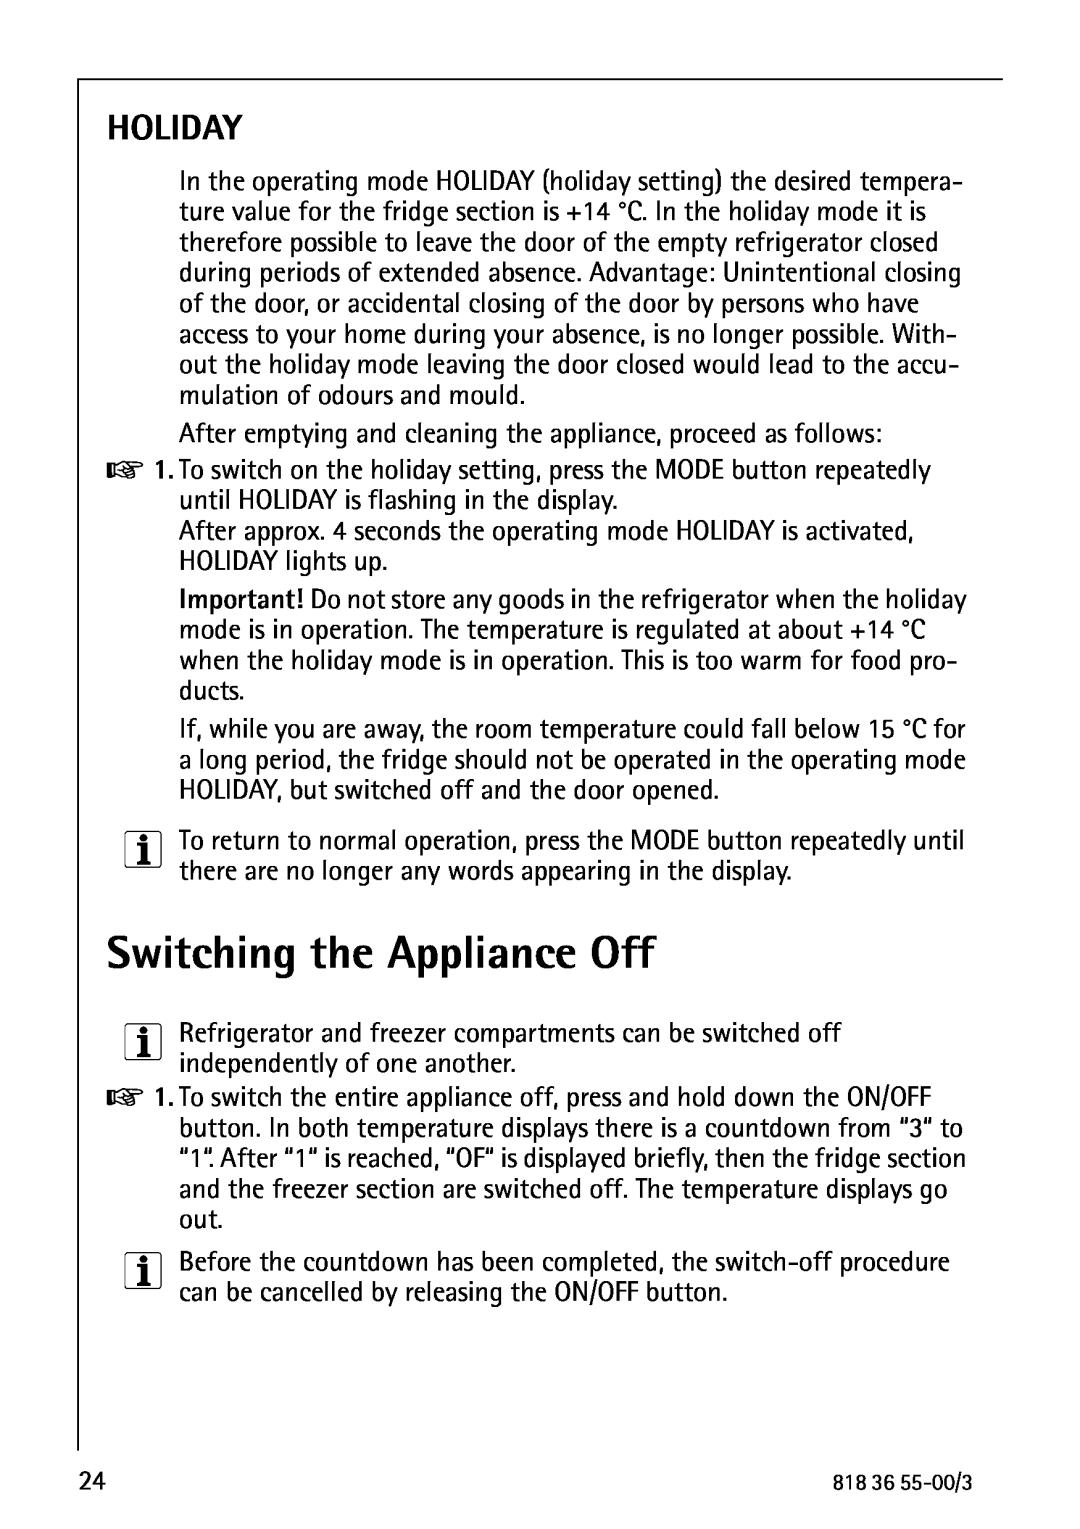 AEG 86378-KG operating instructions Switching the Appliance Off, Holiday 